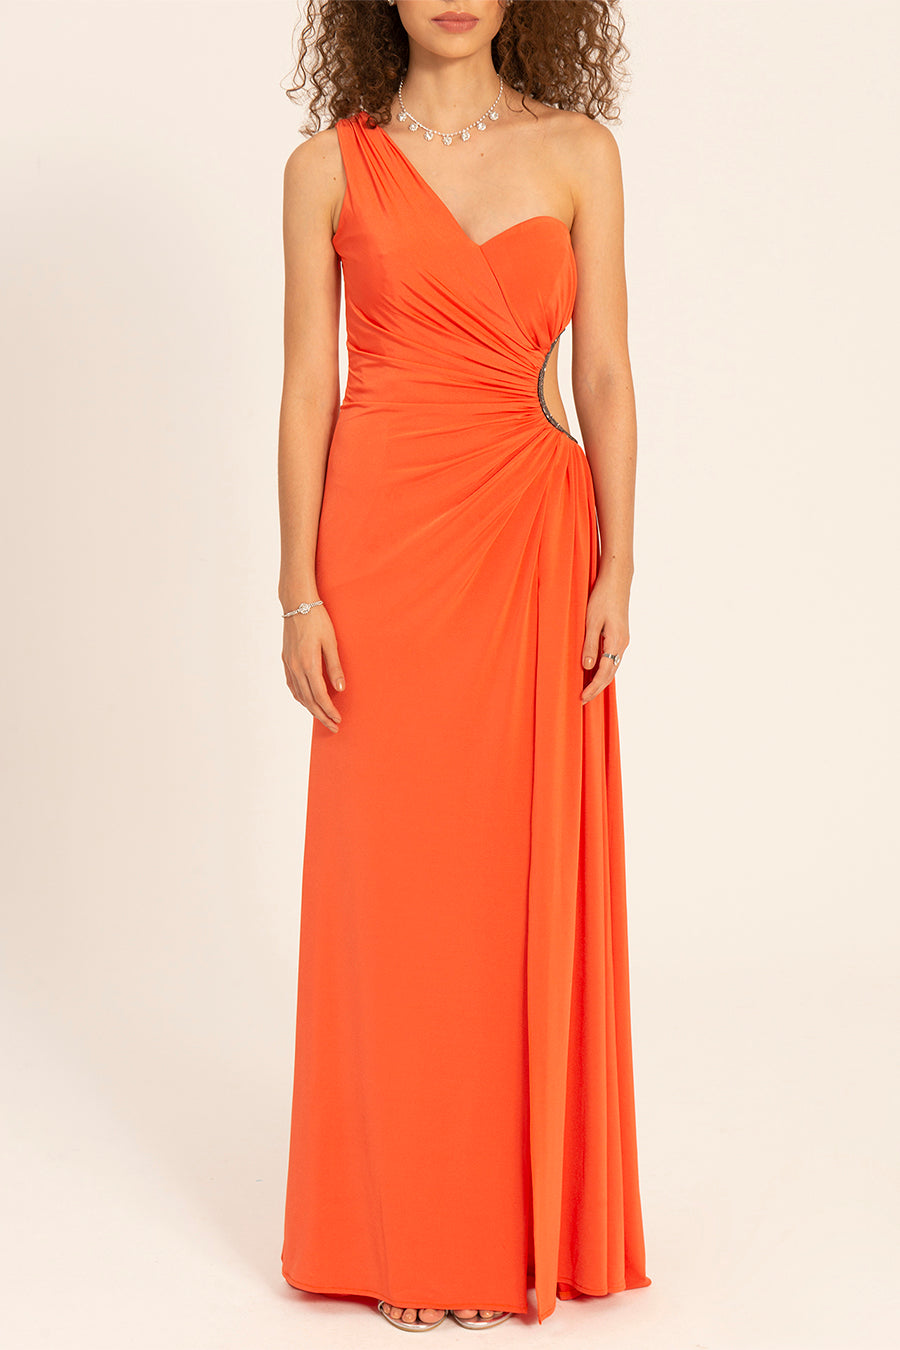 Gina - Mystic Evenings | Evening and Prom Dresses